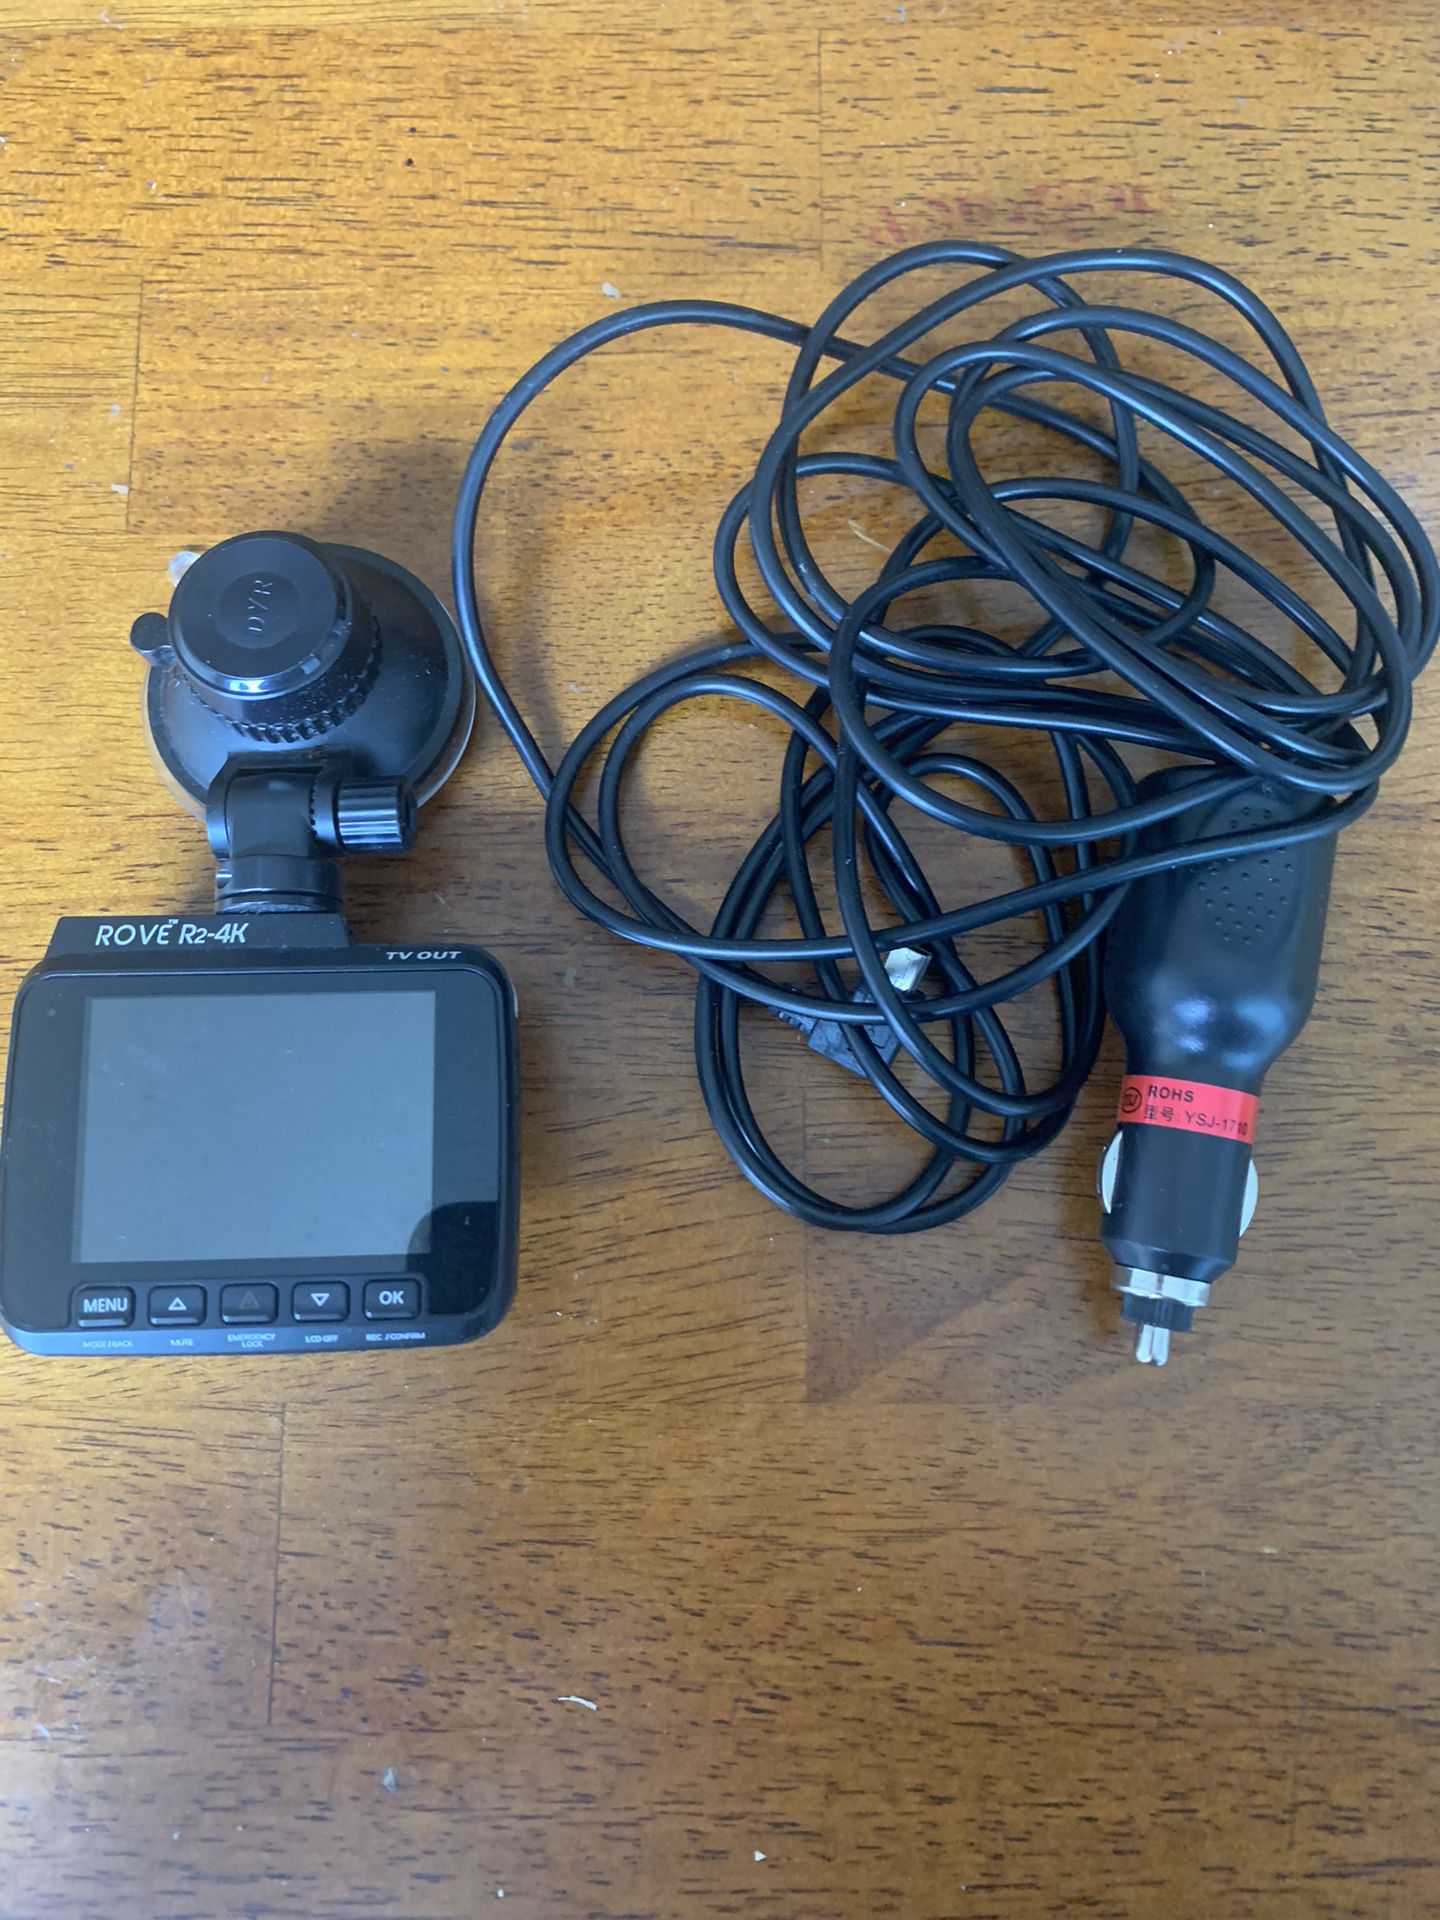 Rove R2-4K New Dash Camera Unused With 128 Micro SD Card.(Price Reduced)  for Sale in Simi Valley, CA - OfferUp